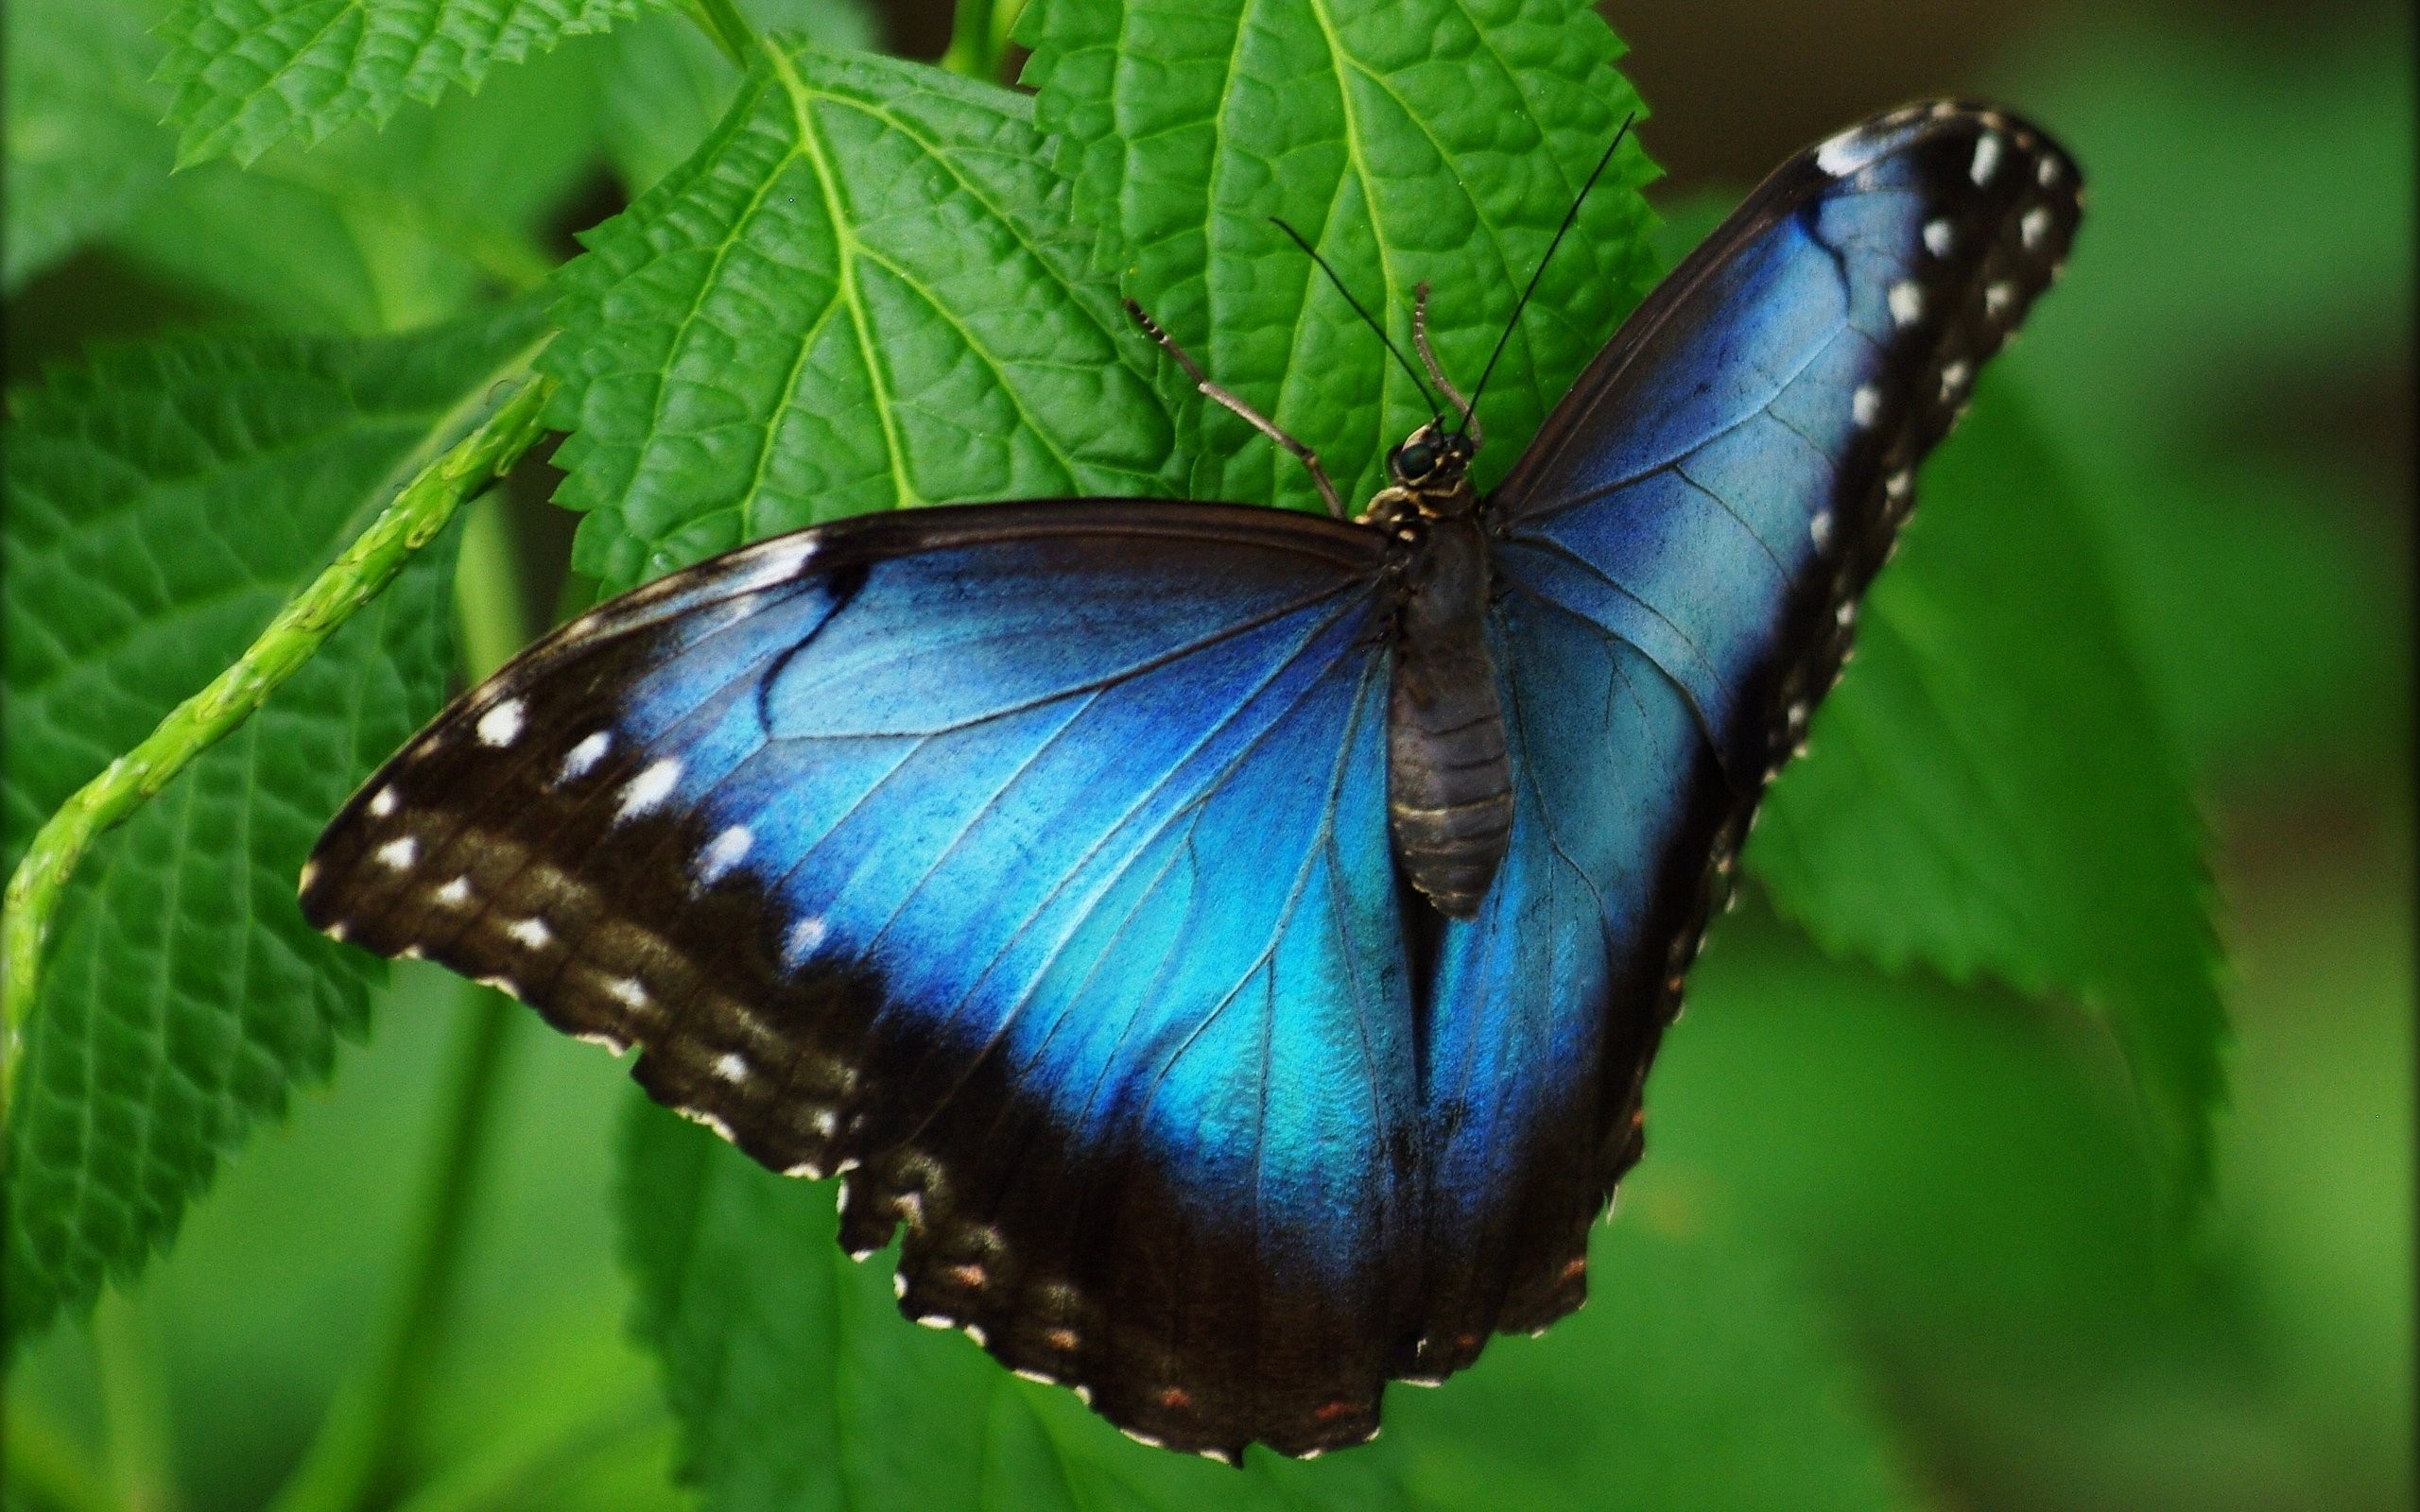 A bright black and blue butterfly on a leaf.